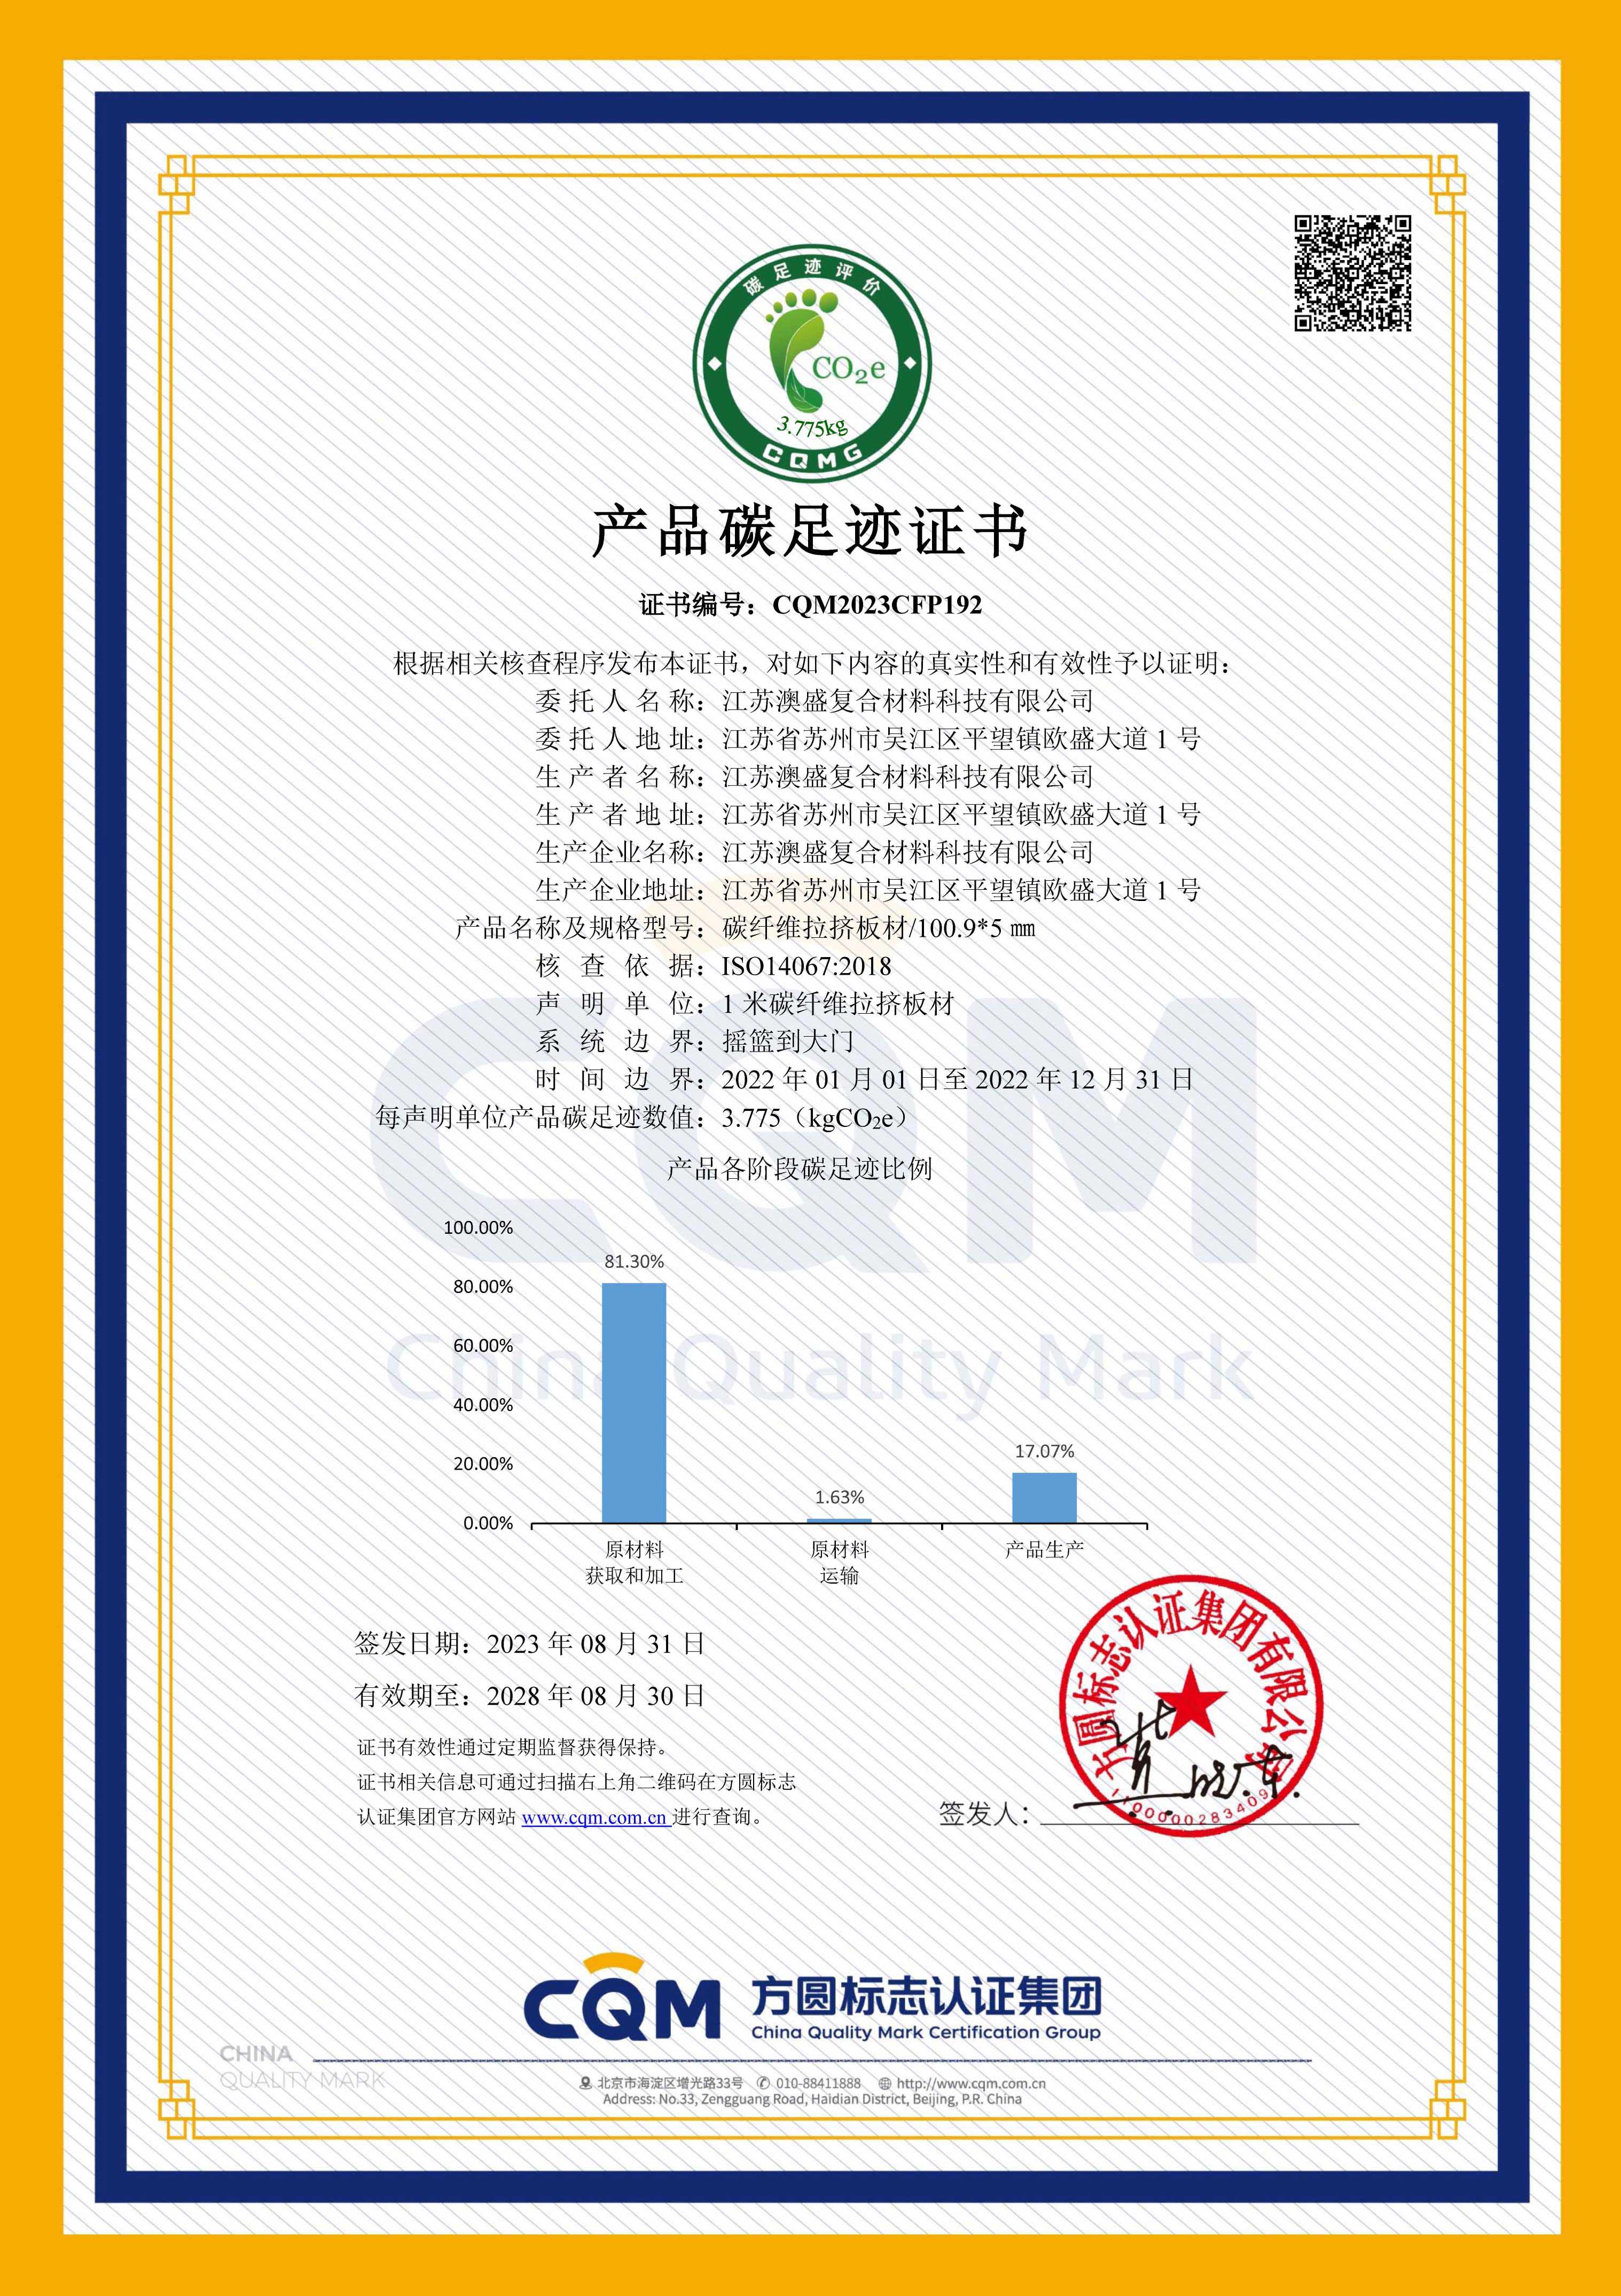 Product carbon footprint certificate